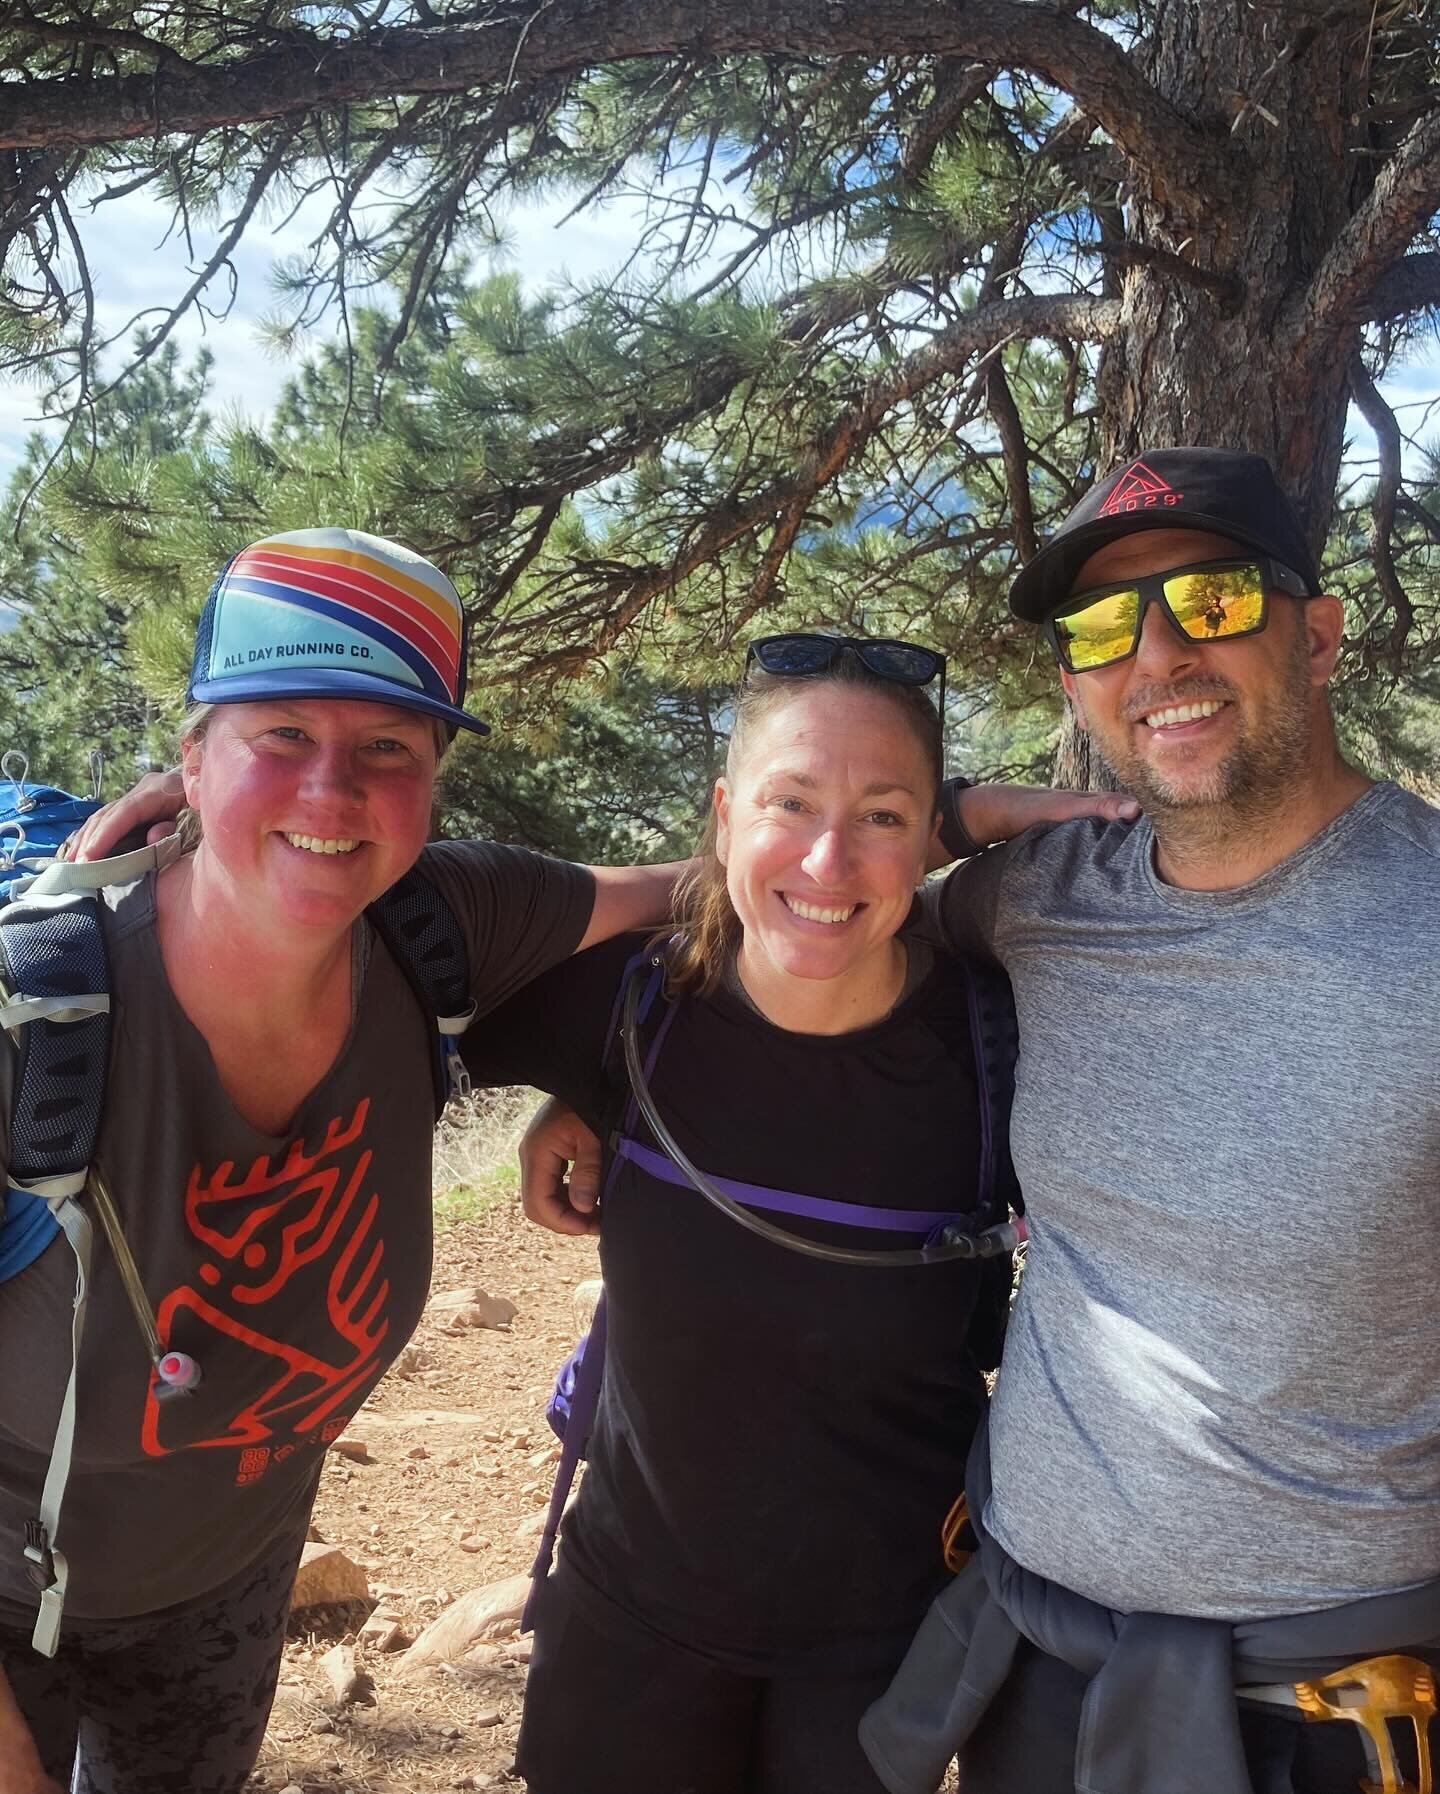 So fun to run into other fans of @jesseitzler @alldayrunningco @29029everesting ! I first met Brooke on the soccer field where our kids practice. She did 29029 Westler. Today I ran into her on the Sanitas Trail and met her husband. They both are trai